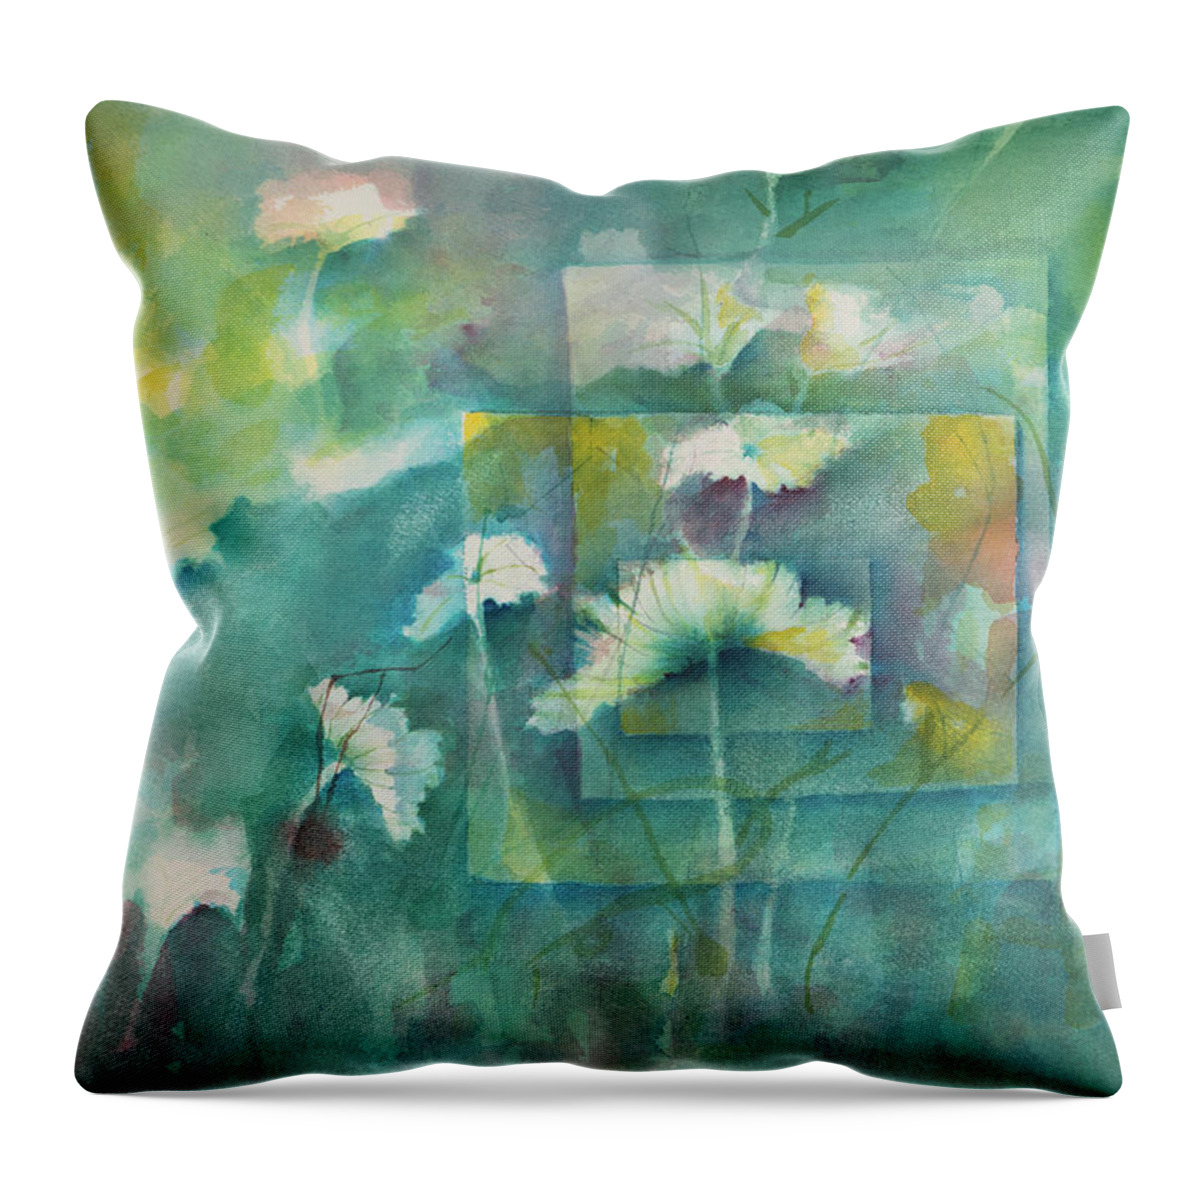 Watercolor Throw Pillow featuring the painting Her Royal Highness by Lee Beuther